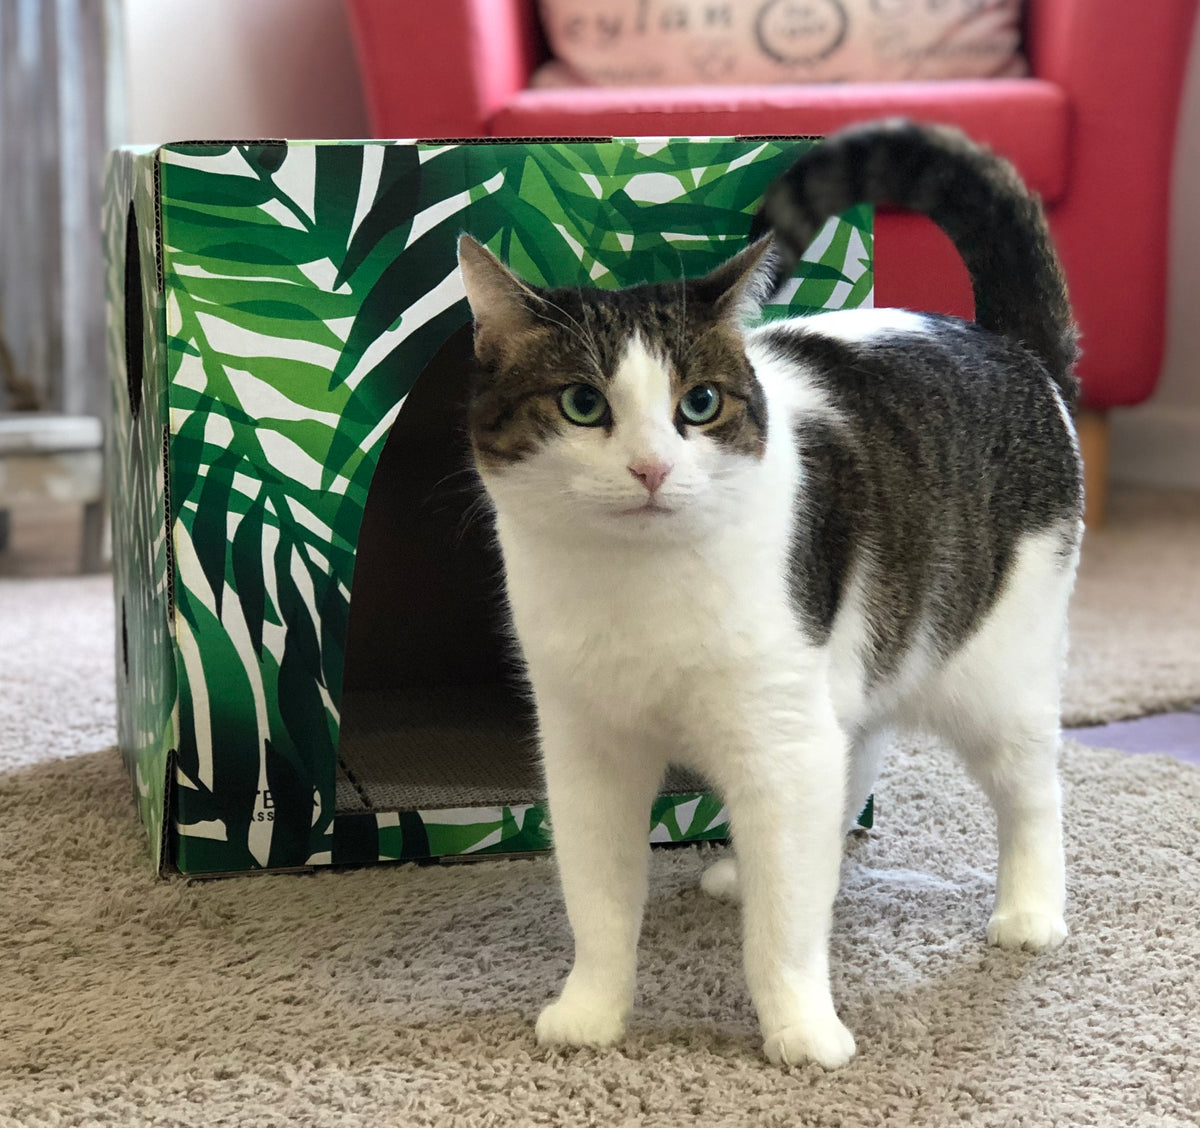 Grey and white cat standing in front of Kitty Jungle Cardboard Cat House